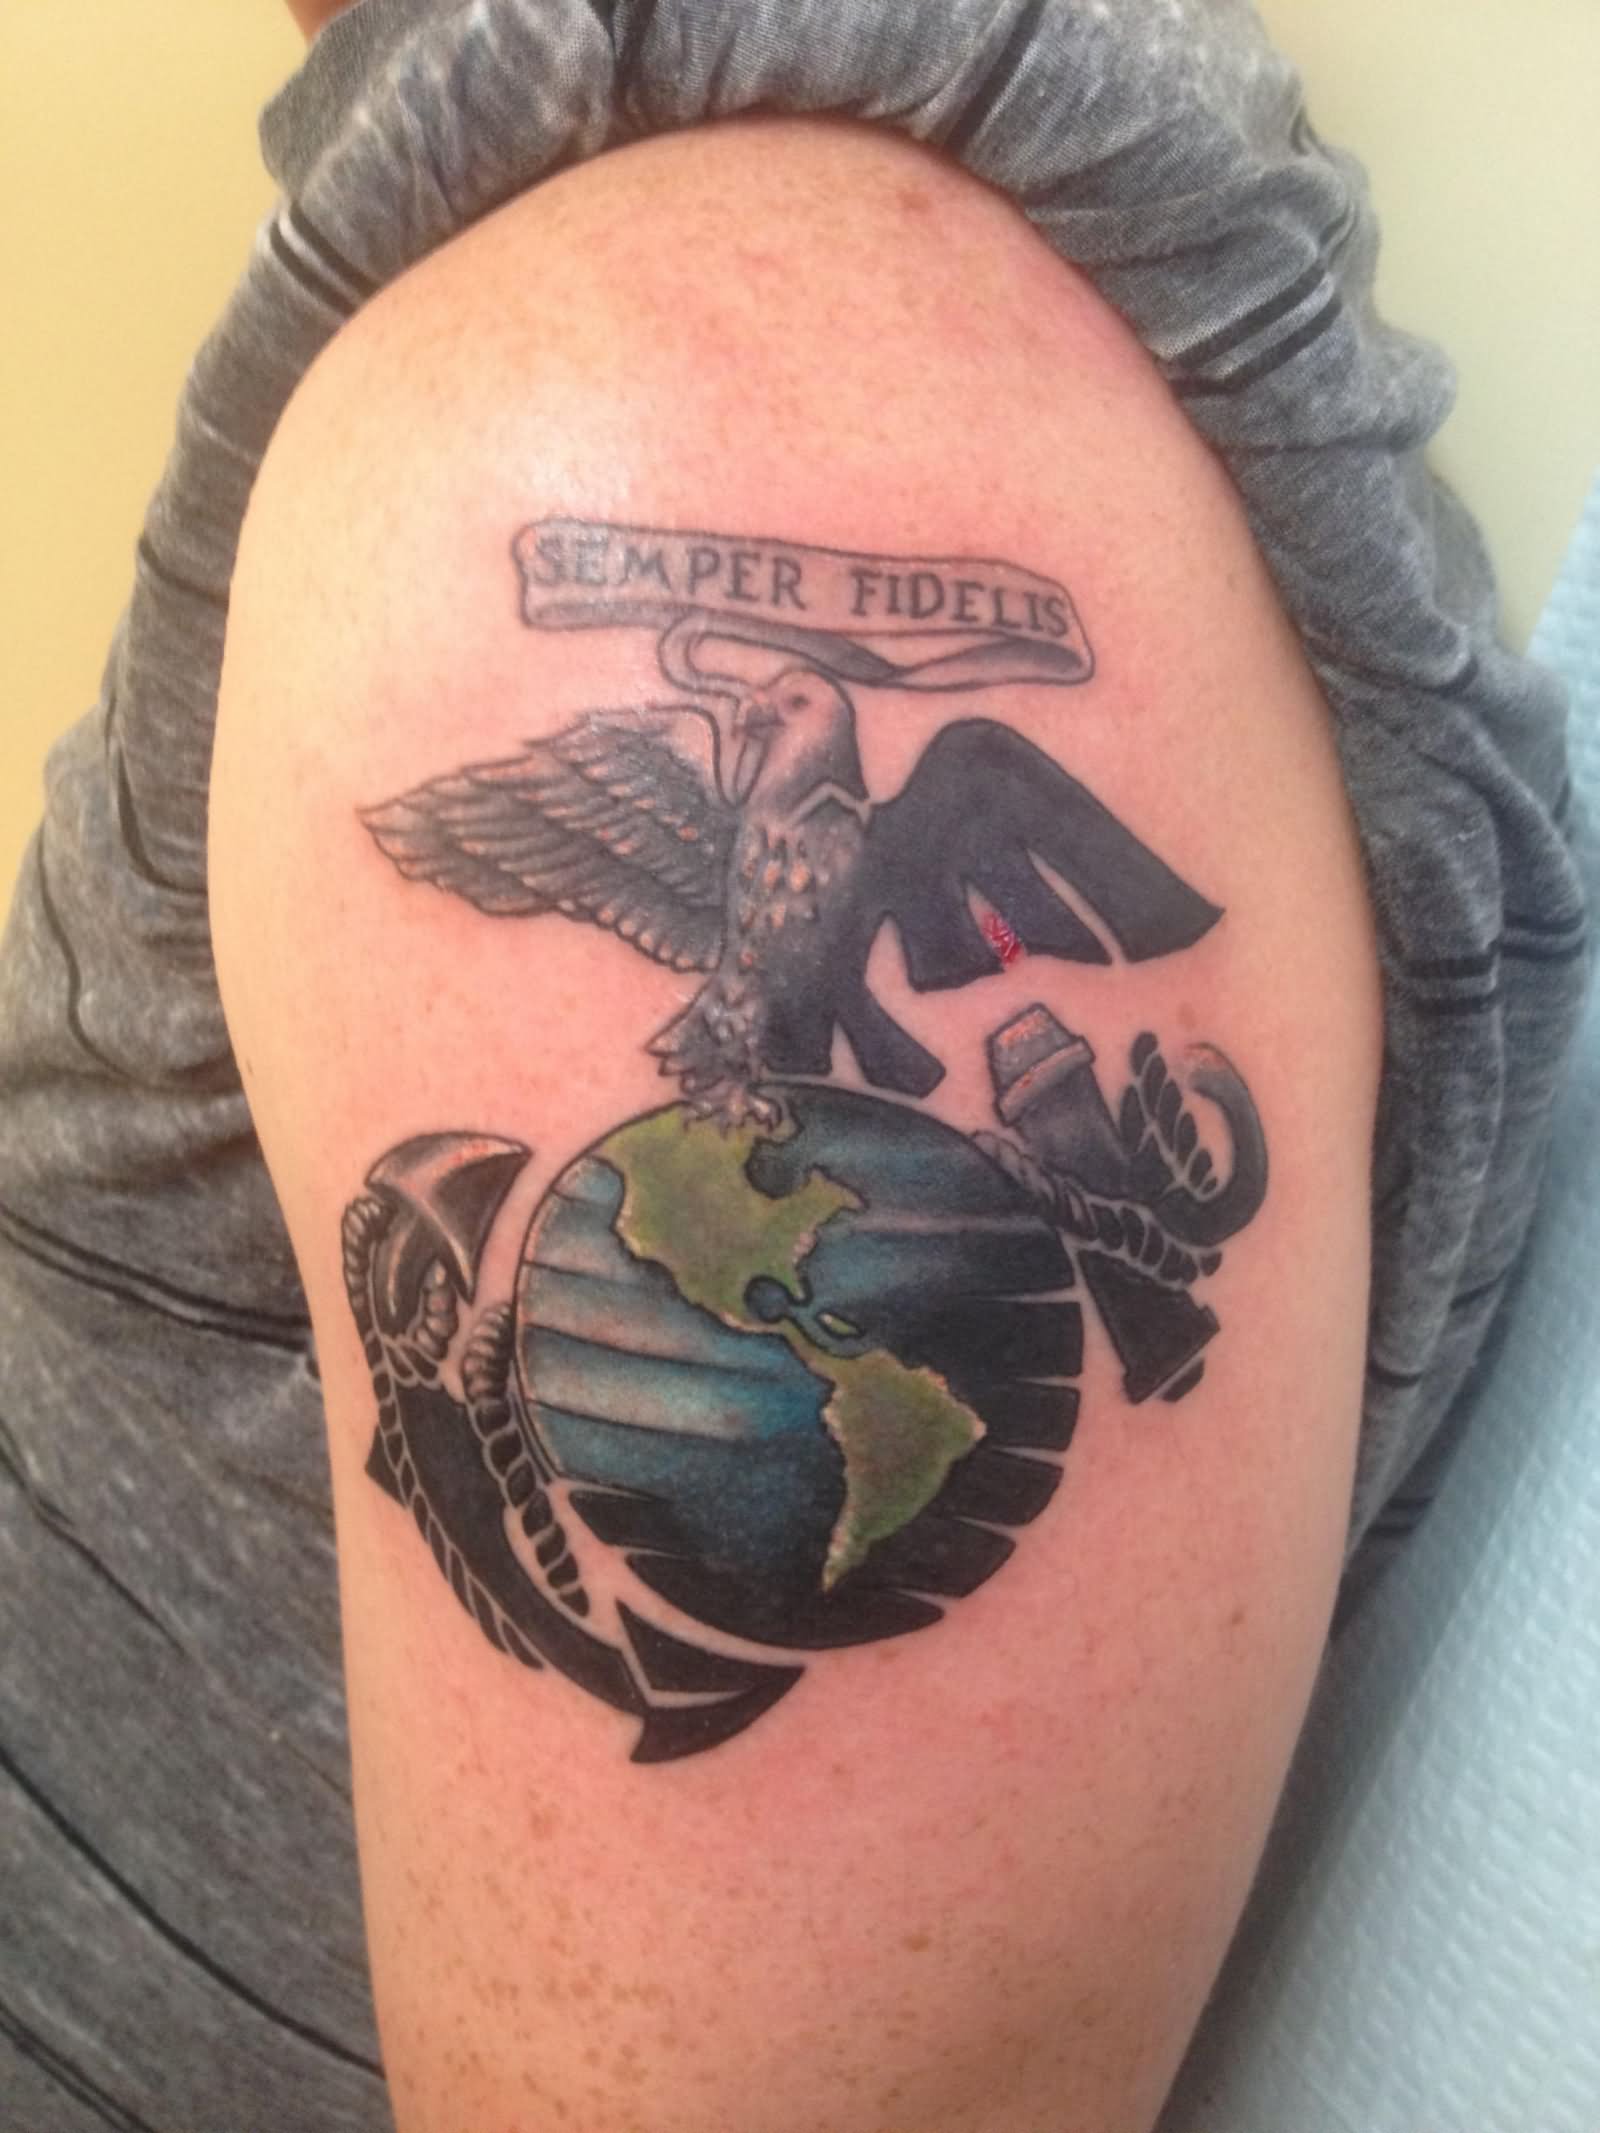 Traditional, mixed new era Eagle, Globe and Anchor tattoo by Kylee McCoy, owner of Oregon Heart Tattoo